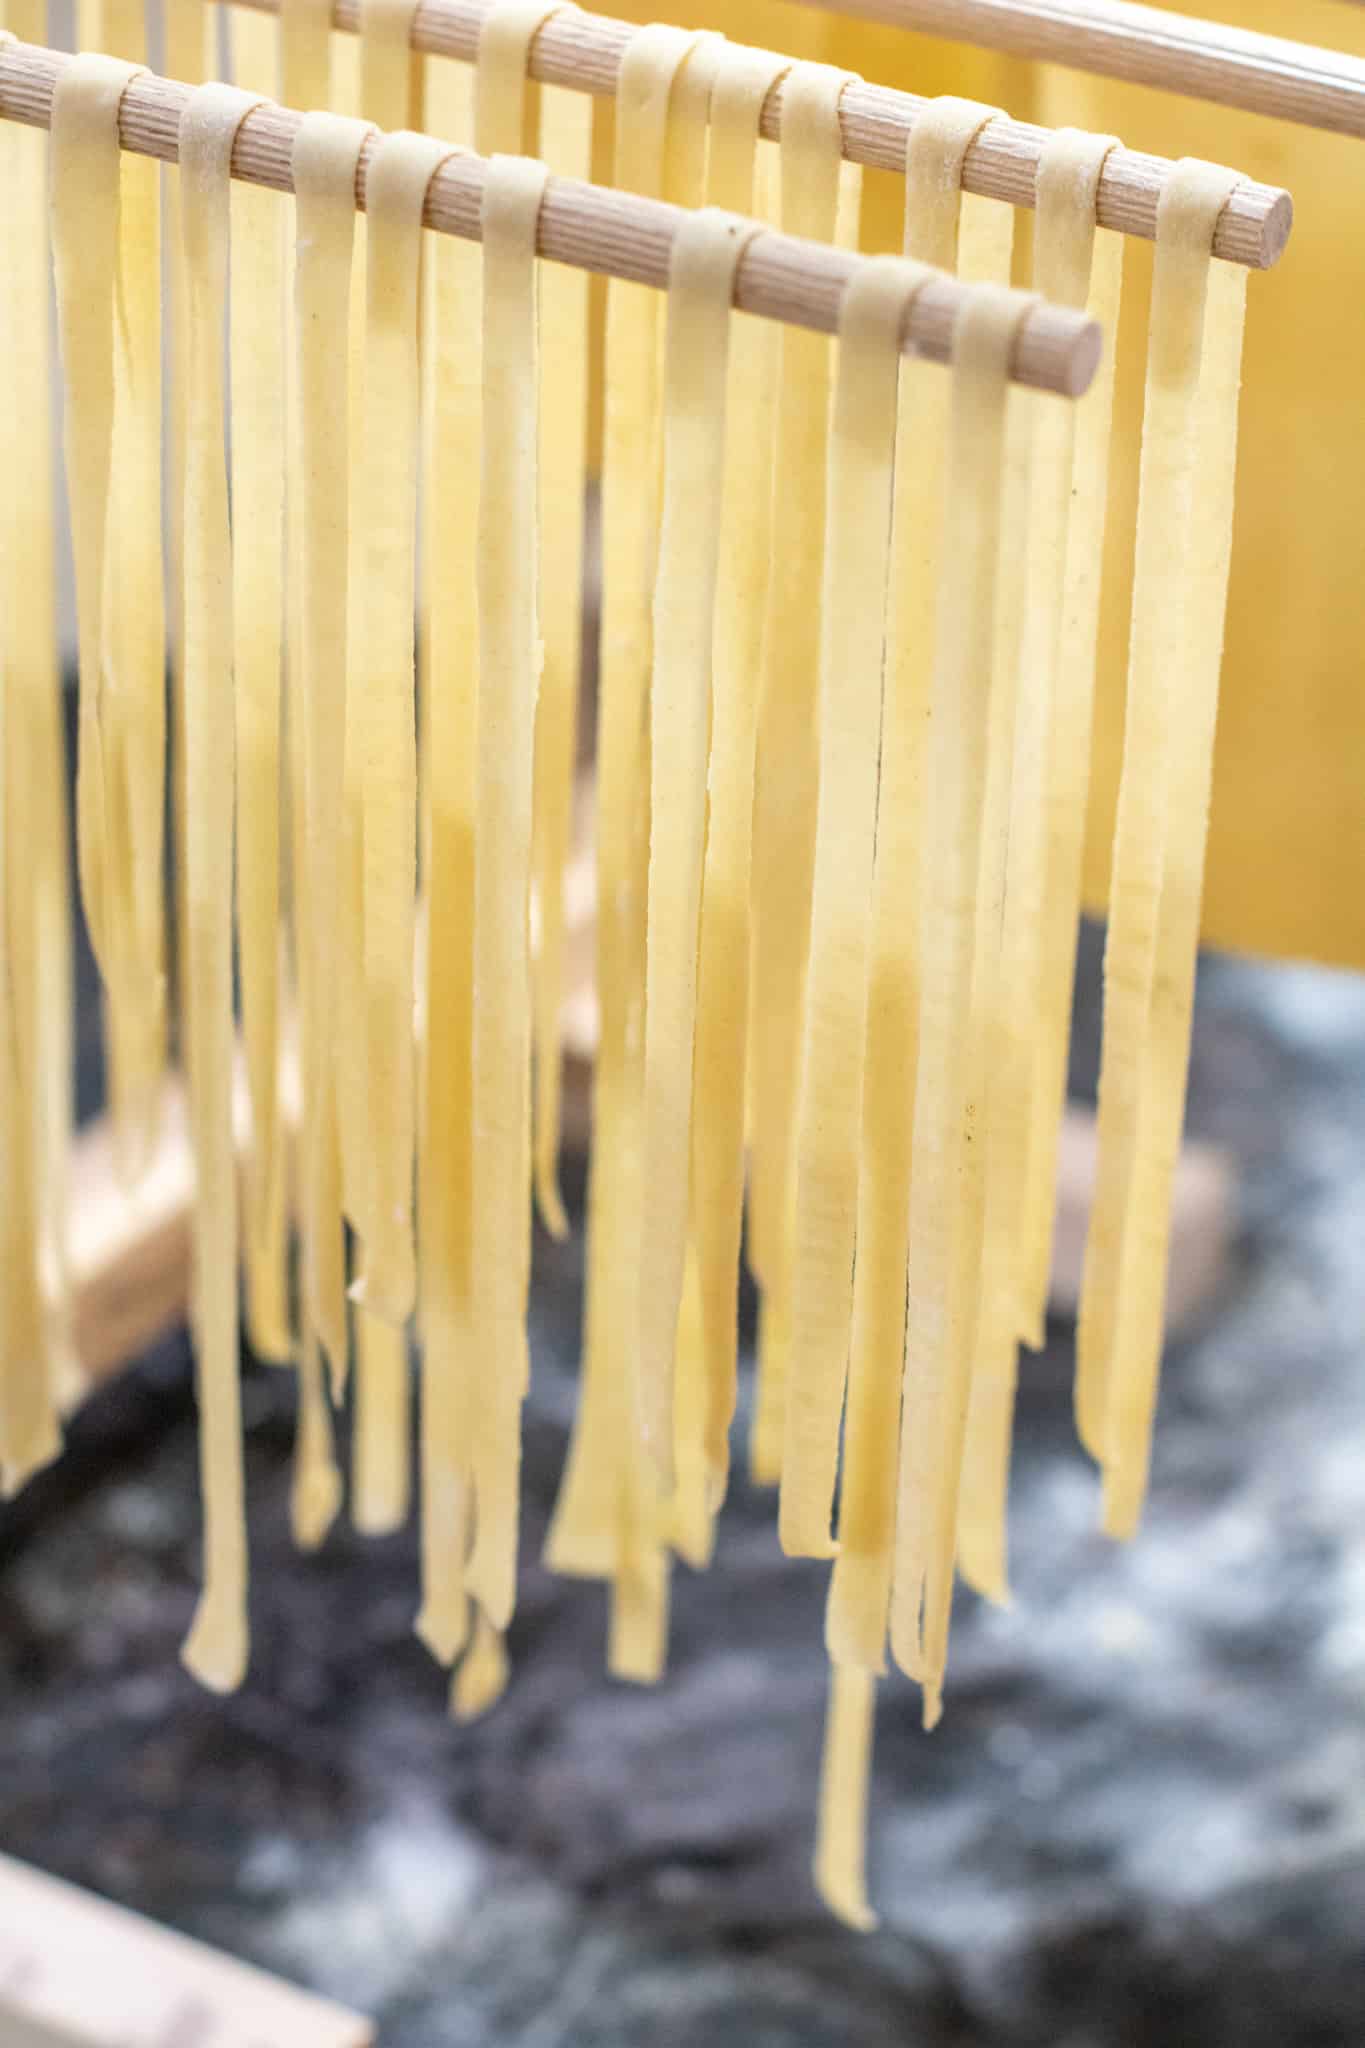 Fresh Homemade Pasta - Served From Scratch